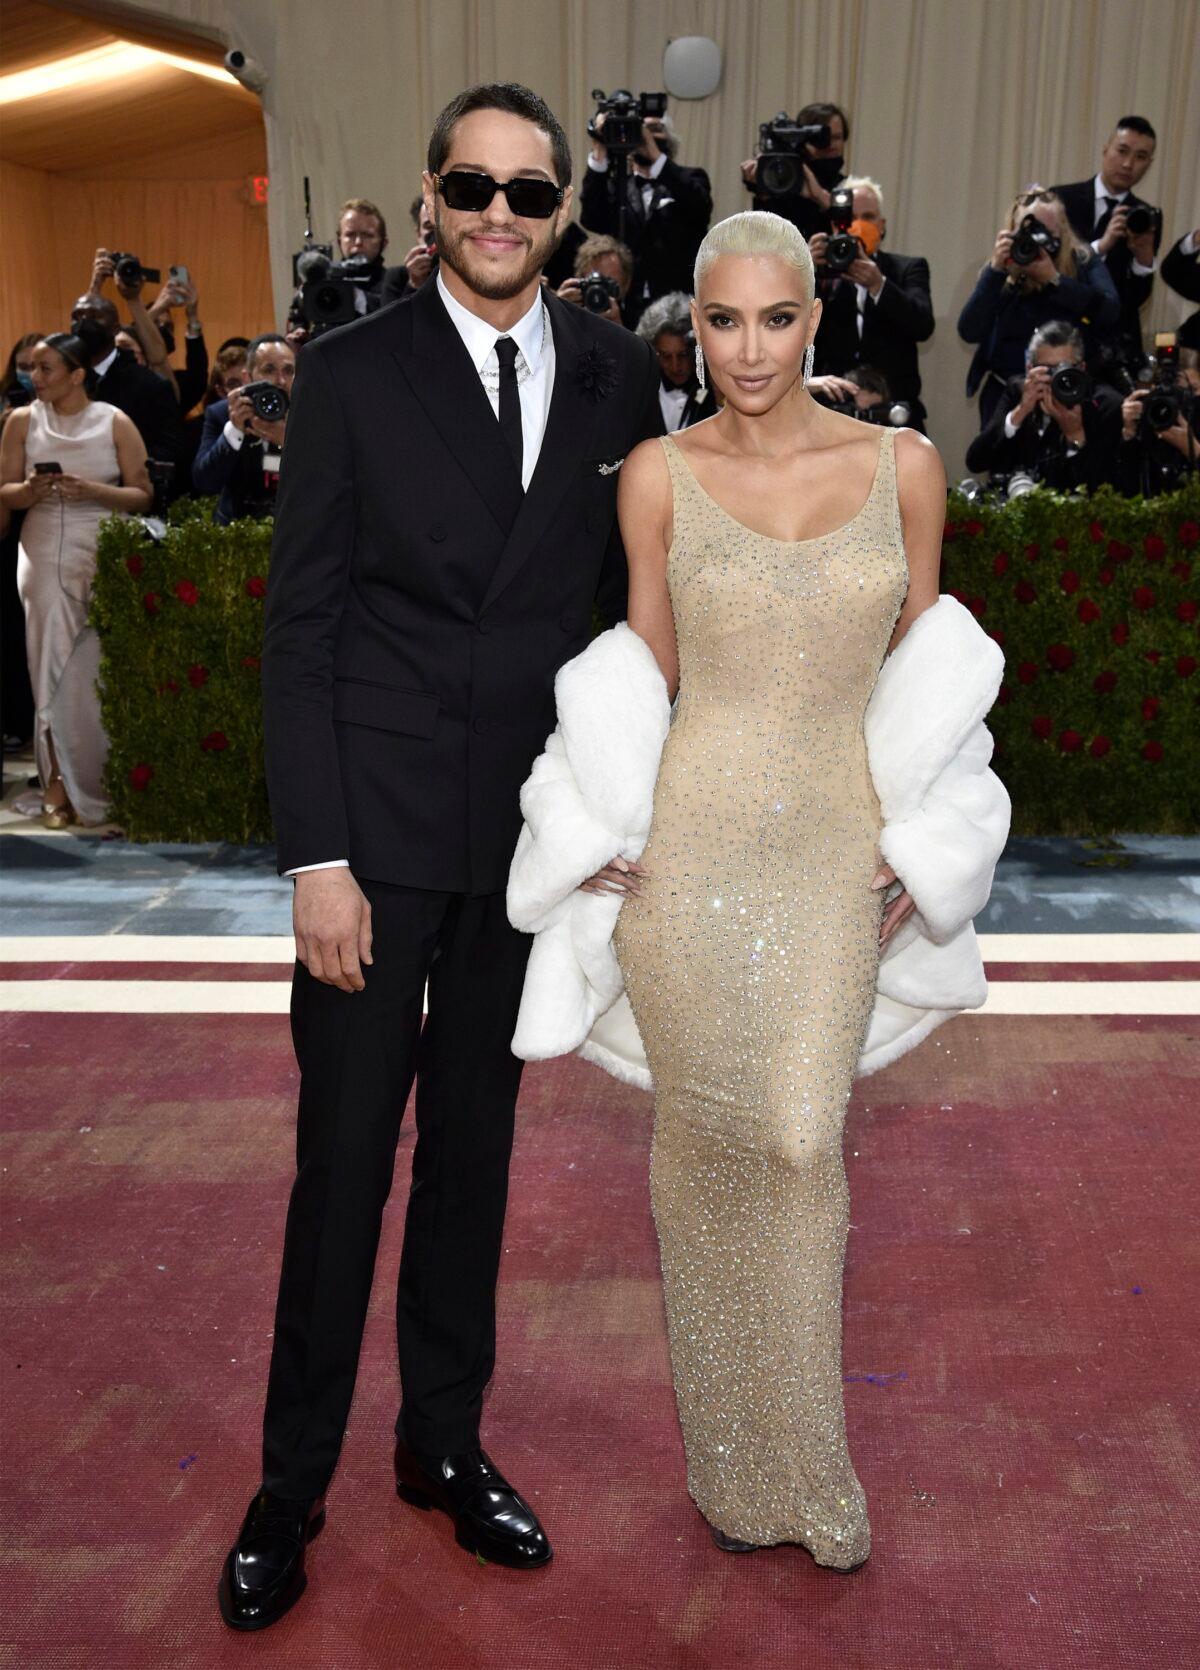 Kim Kardashian (R) and Pete Davidson attend The Metropolitan Museum of Art's Costume Institute benefit gala celebrating the opening of the "In America: An Anthology of Fashion" exhibition in New York on May 2, 2022. (Evan Agostini/Invision/AP)